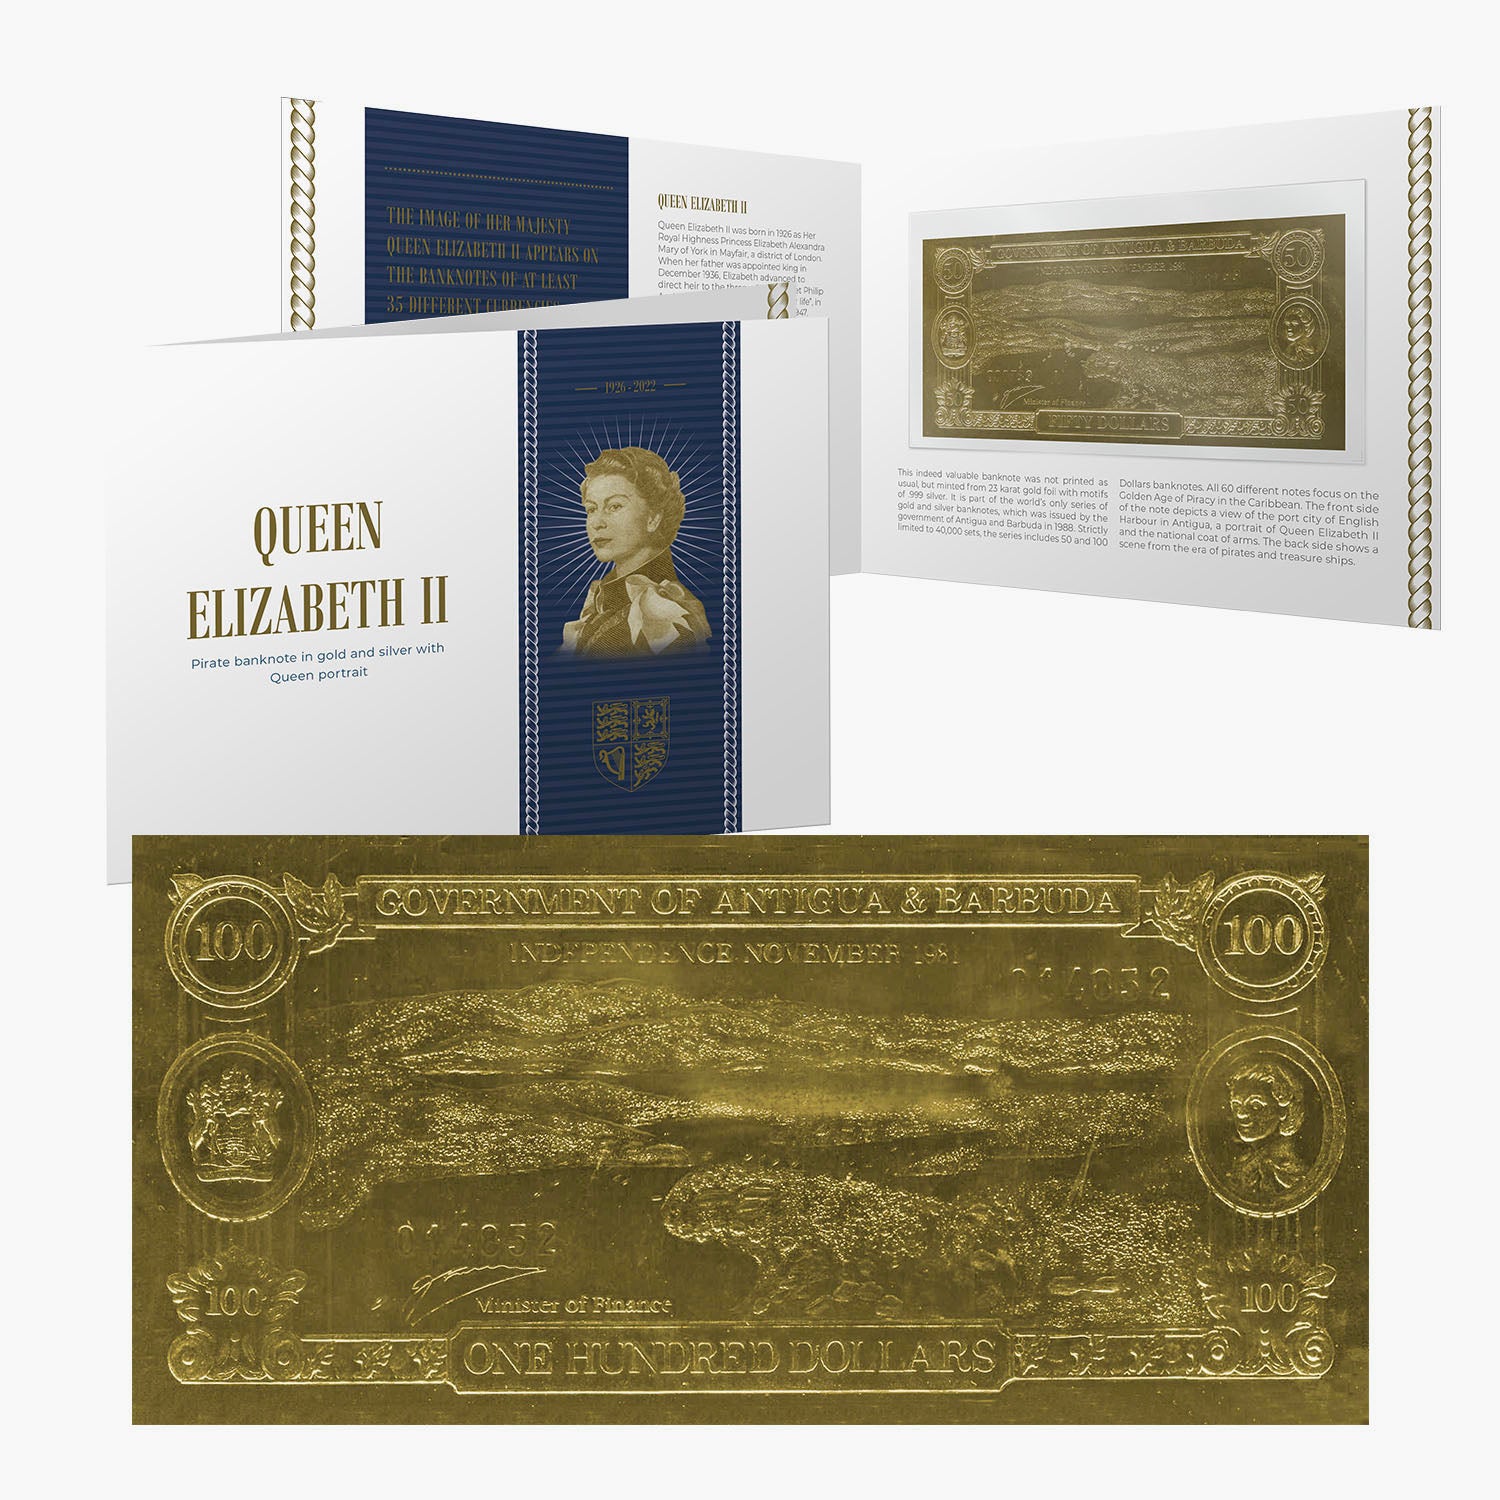 Her Majesty Queen Elizabeth II Royal Gold and Silver Banknote